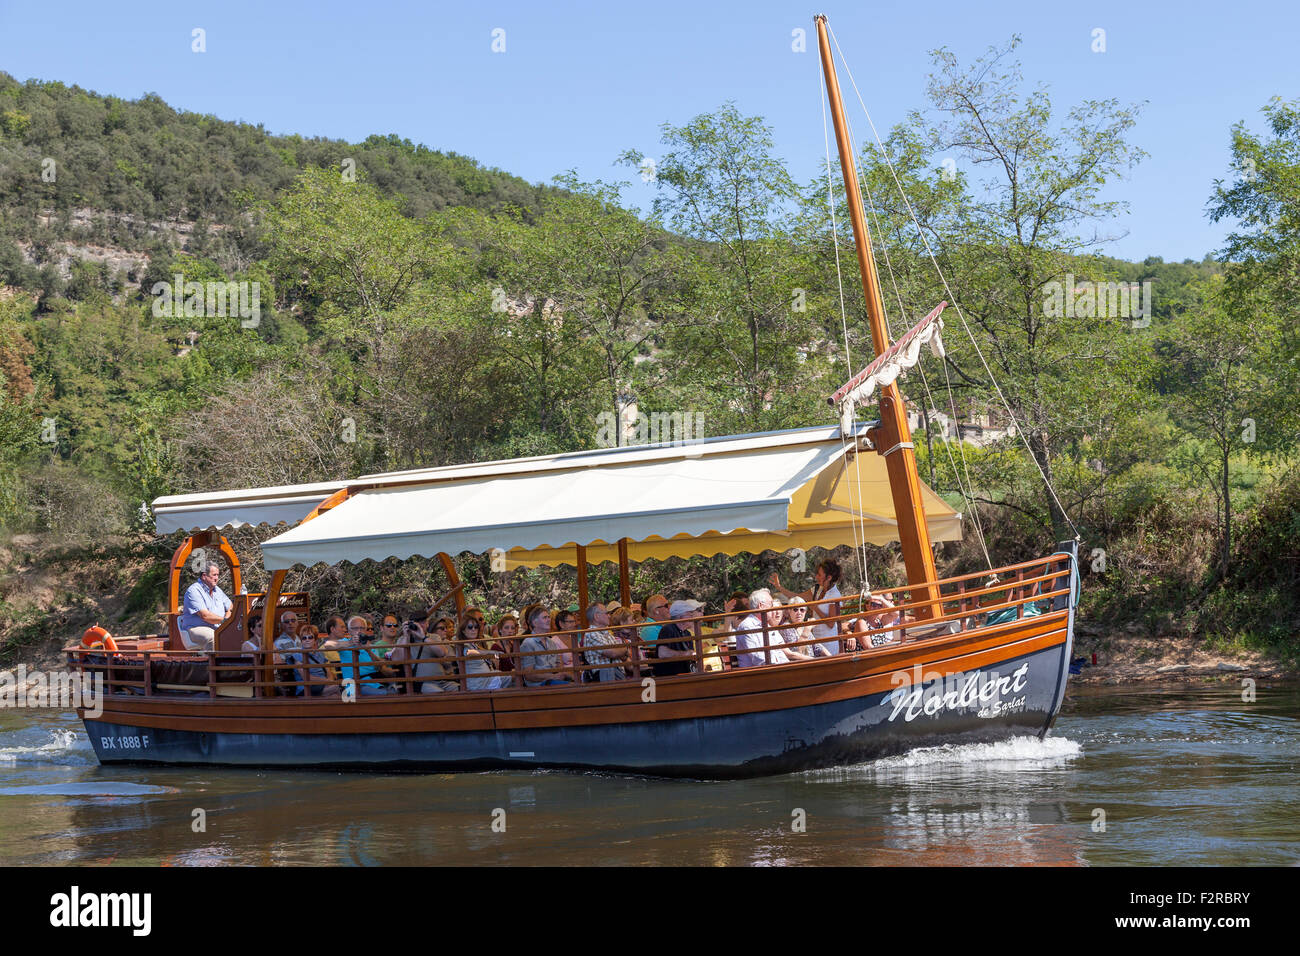 A sail on a 'gabarre' - on the Dordogne river - of paying senior tourists (La Roque Gageac - France). Promenade en gabarre. Stock Photo